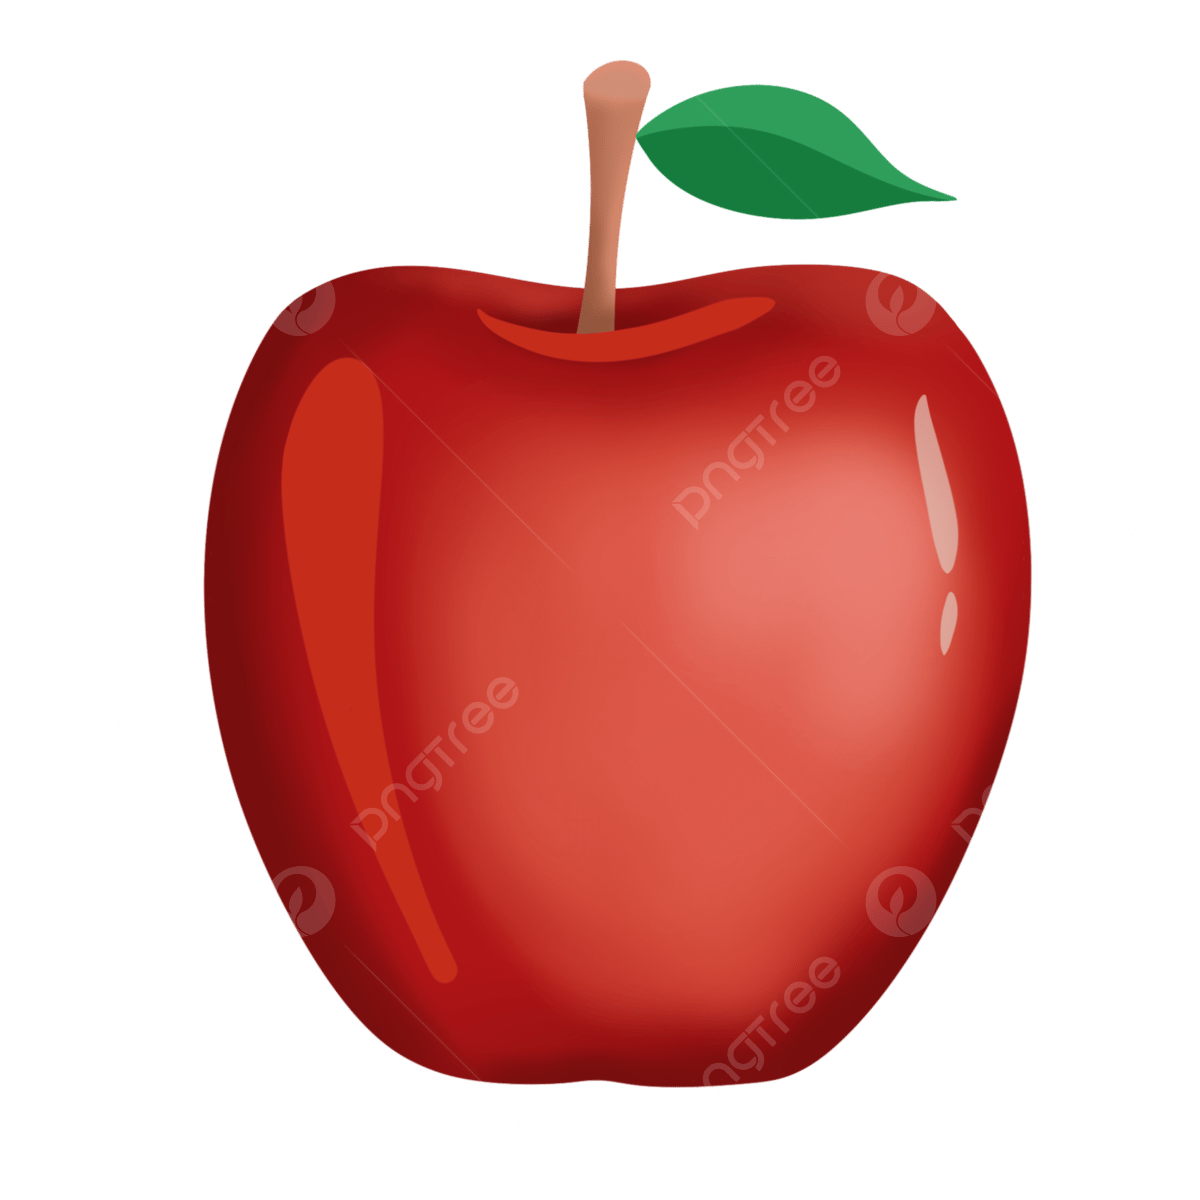 One sweet apple apple fruit red apple png transparent clipart image and psd file for free download